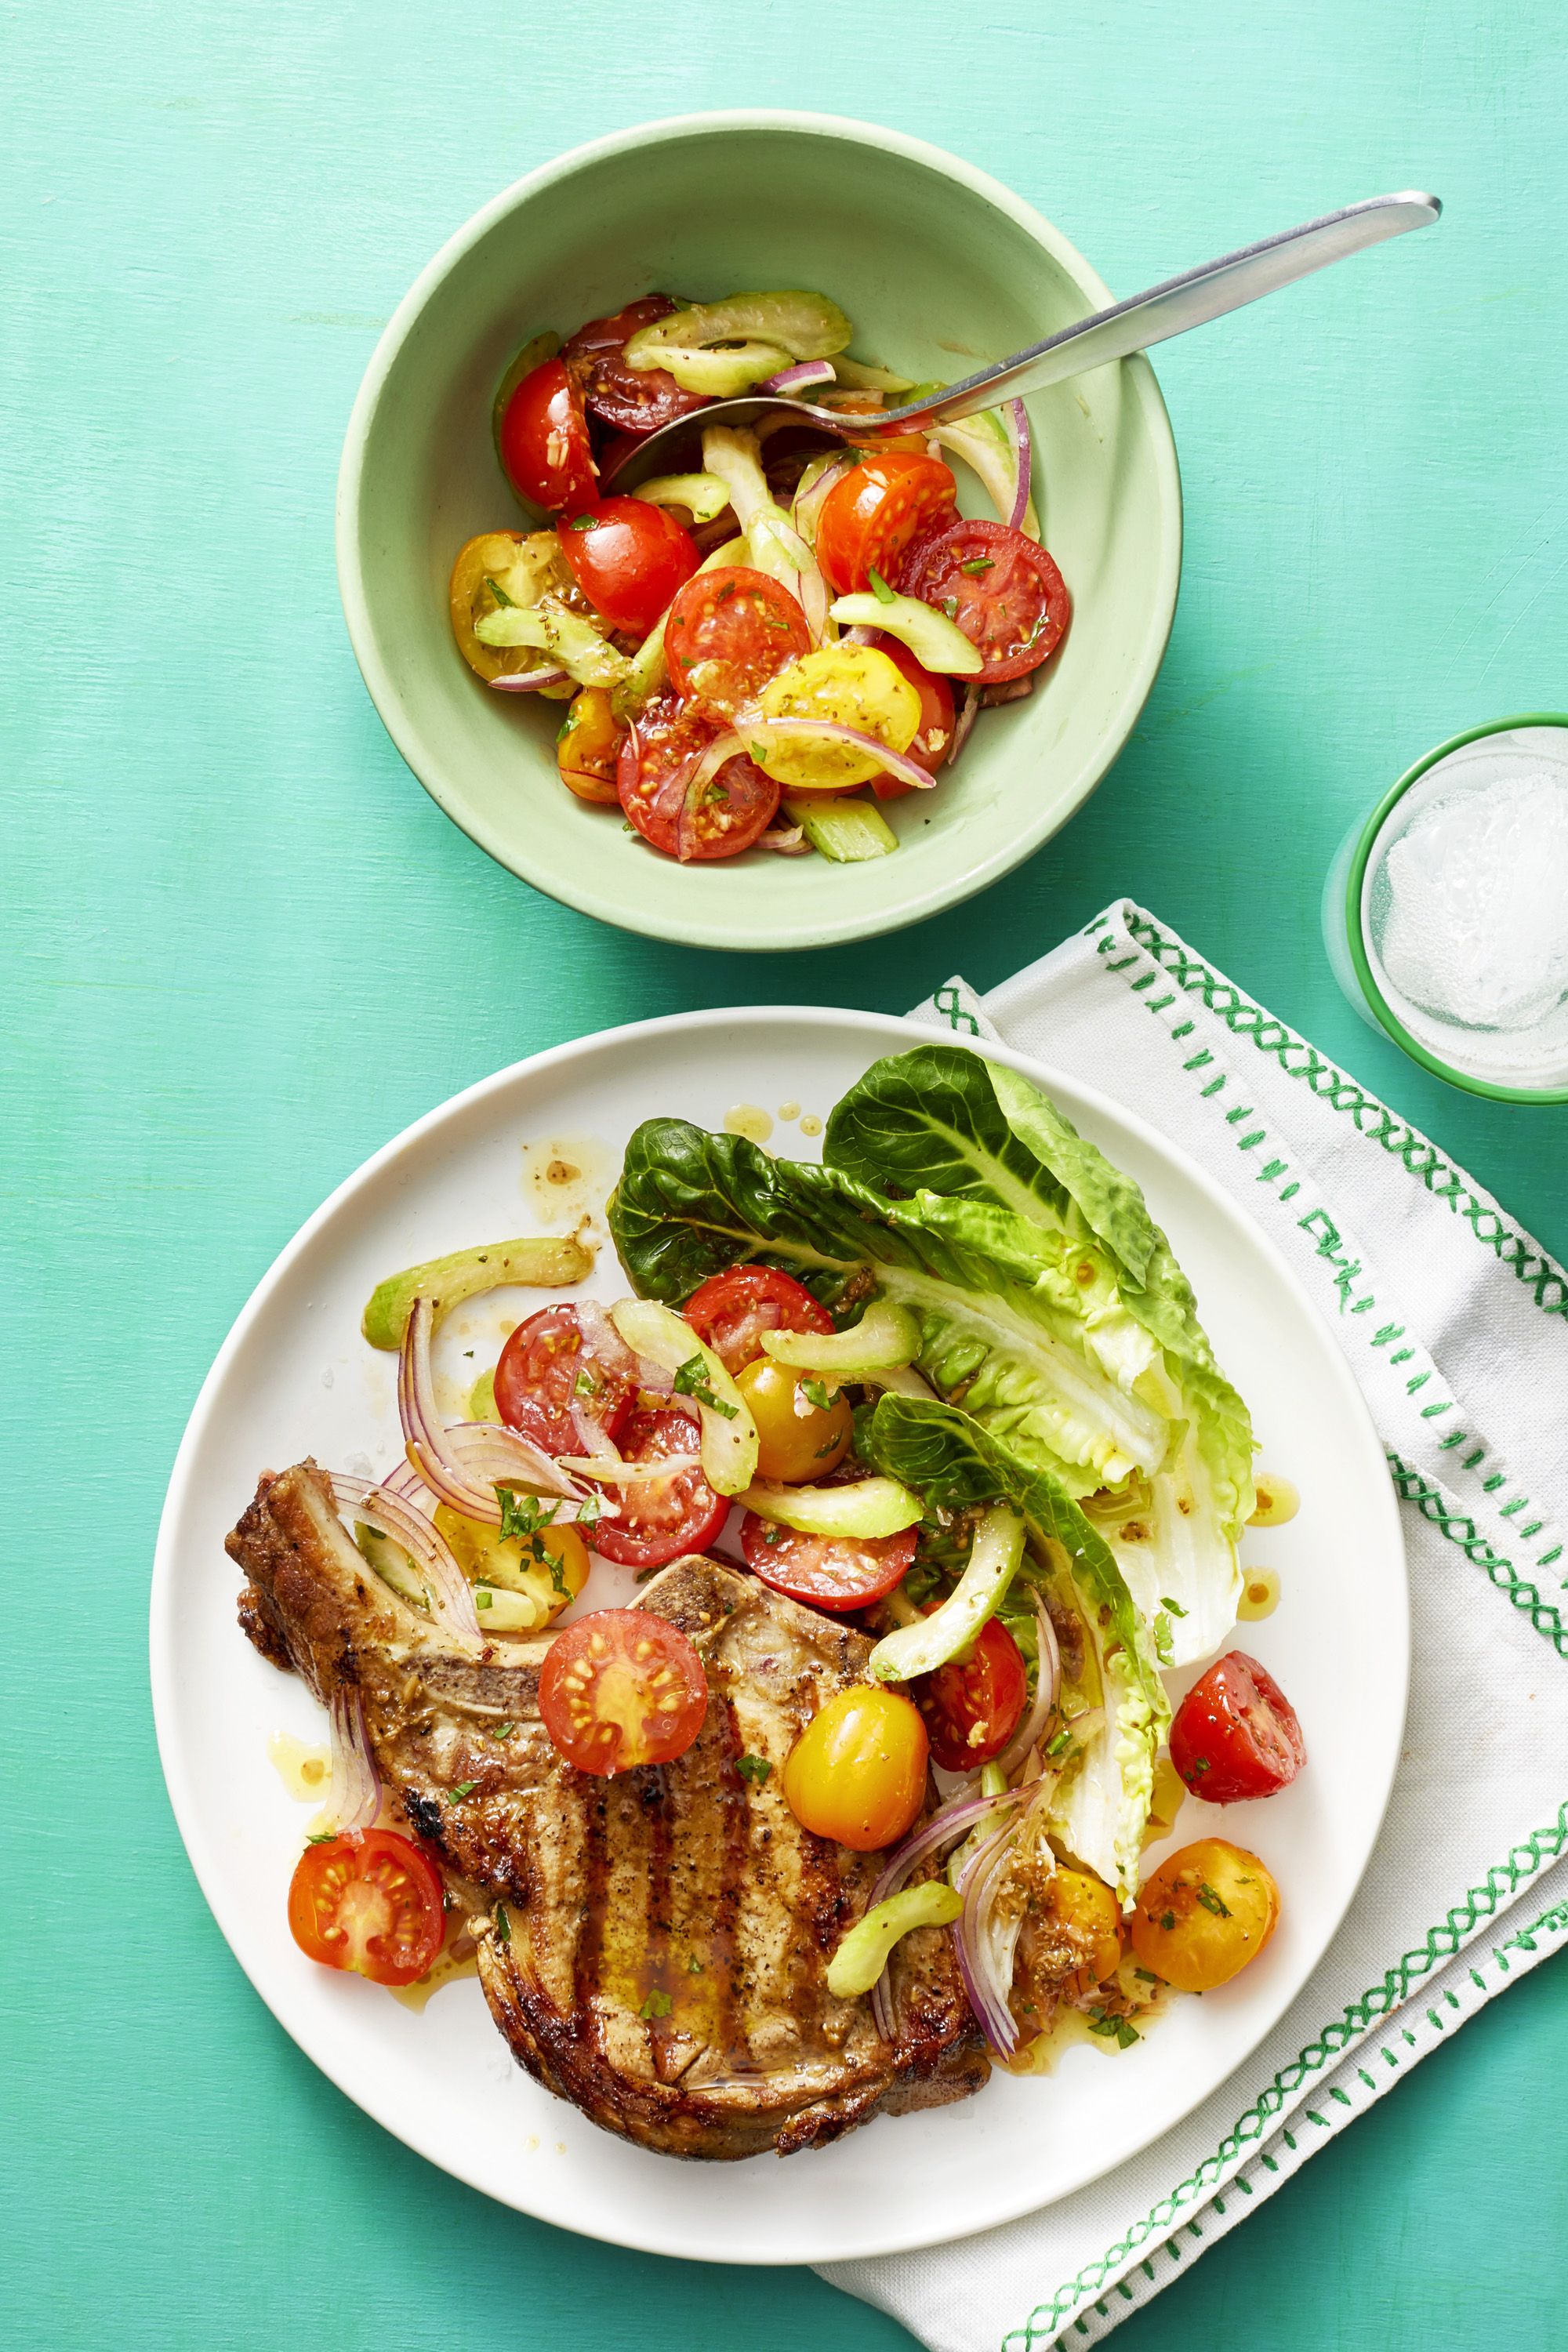 Best Pork Chops with Bloody Mary Tomato Salad Recipe